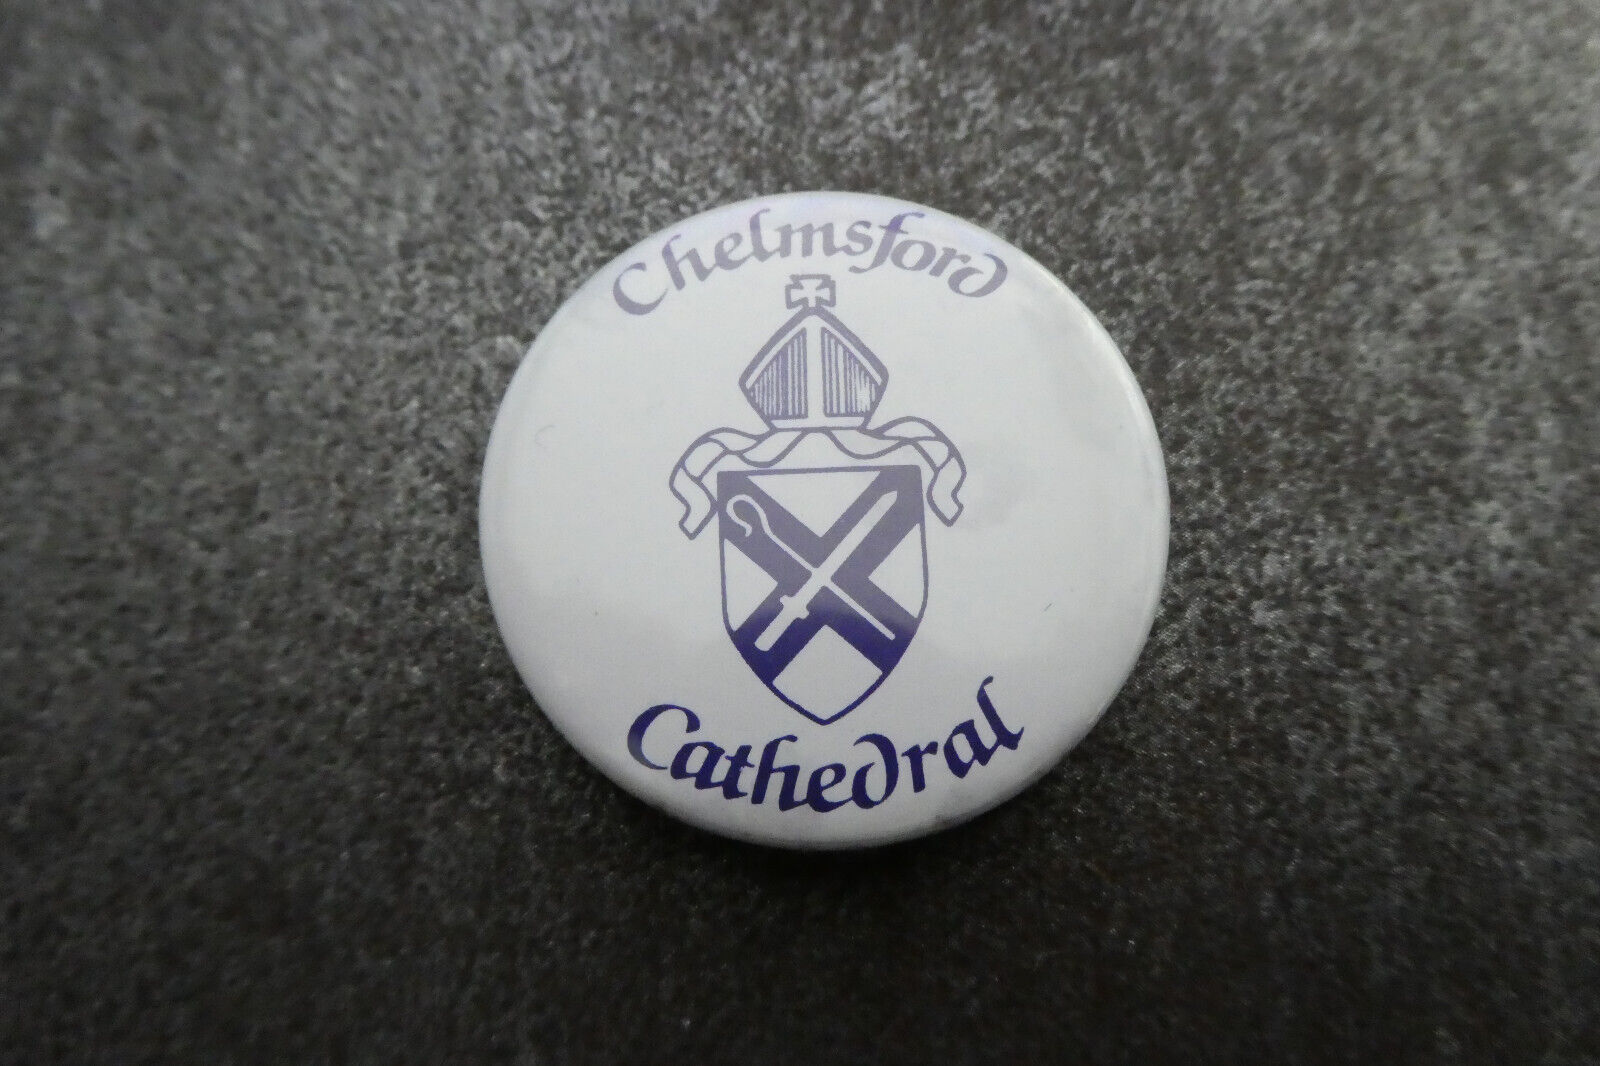 Chelmsford Cathedral Pin Badge Button (L6B)